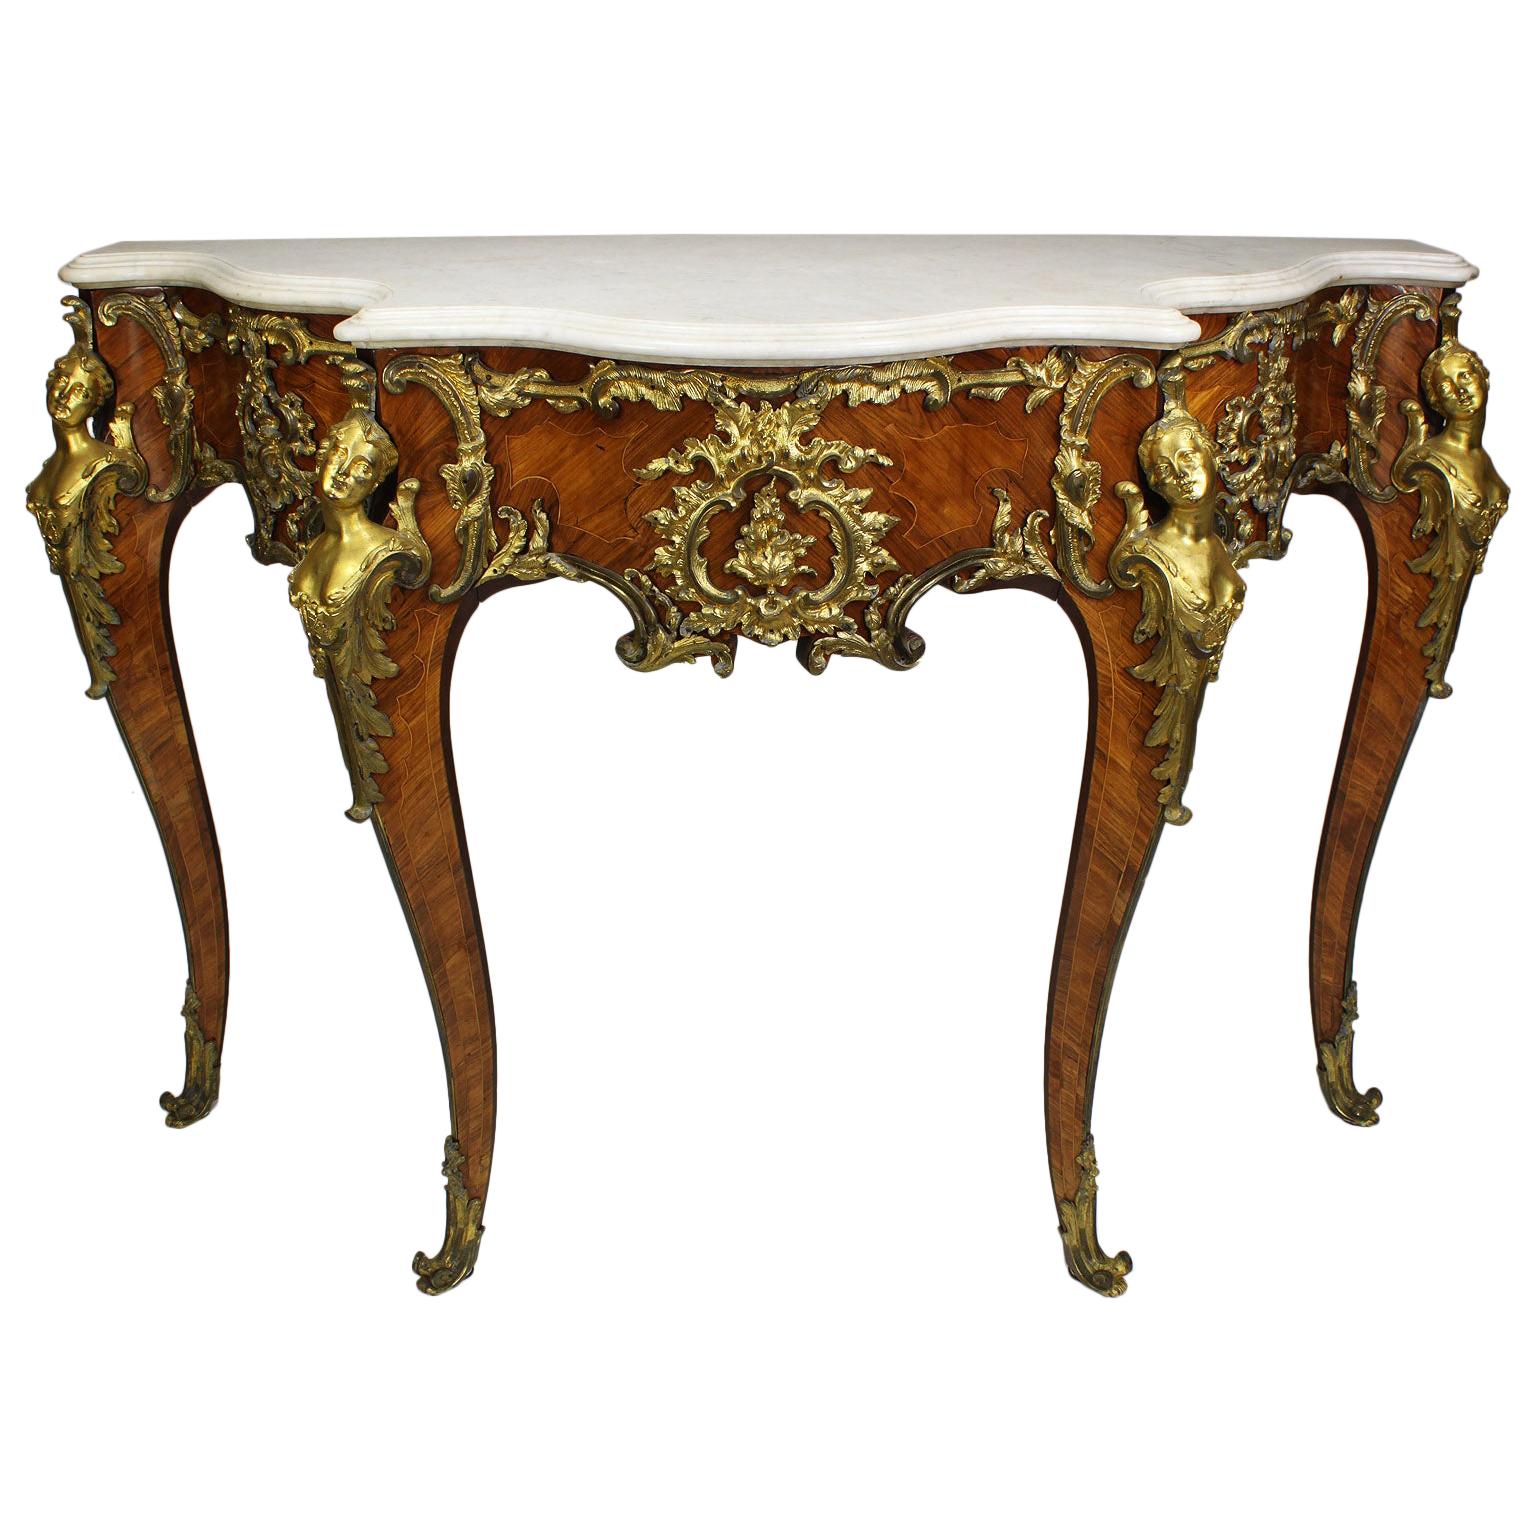 French 19th Century Louis XV Style Ormolu-Mounted Console After Charles Cressent